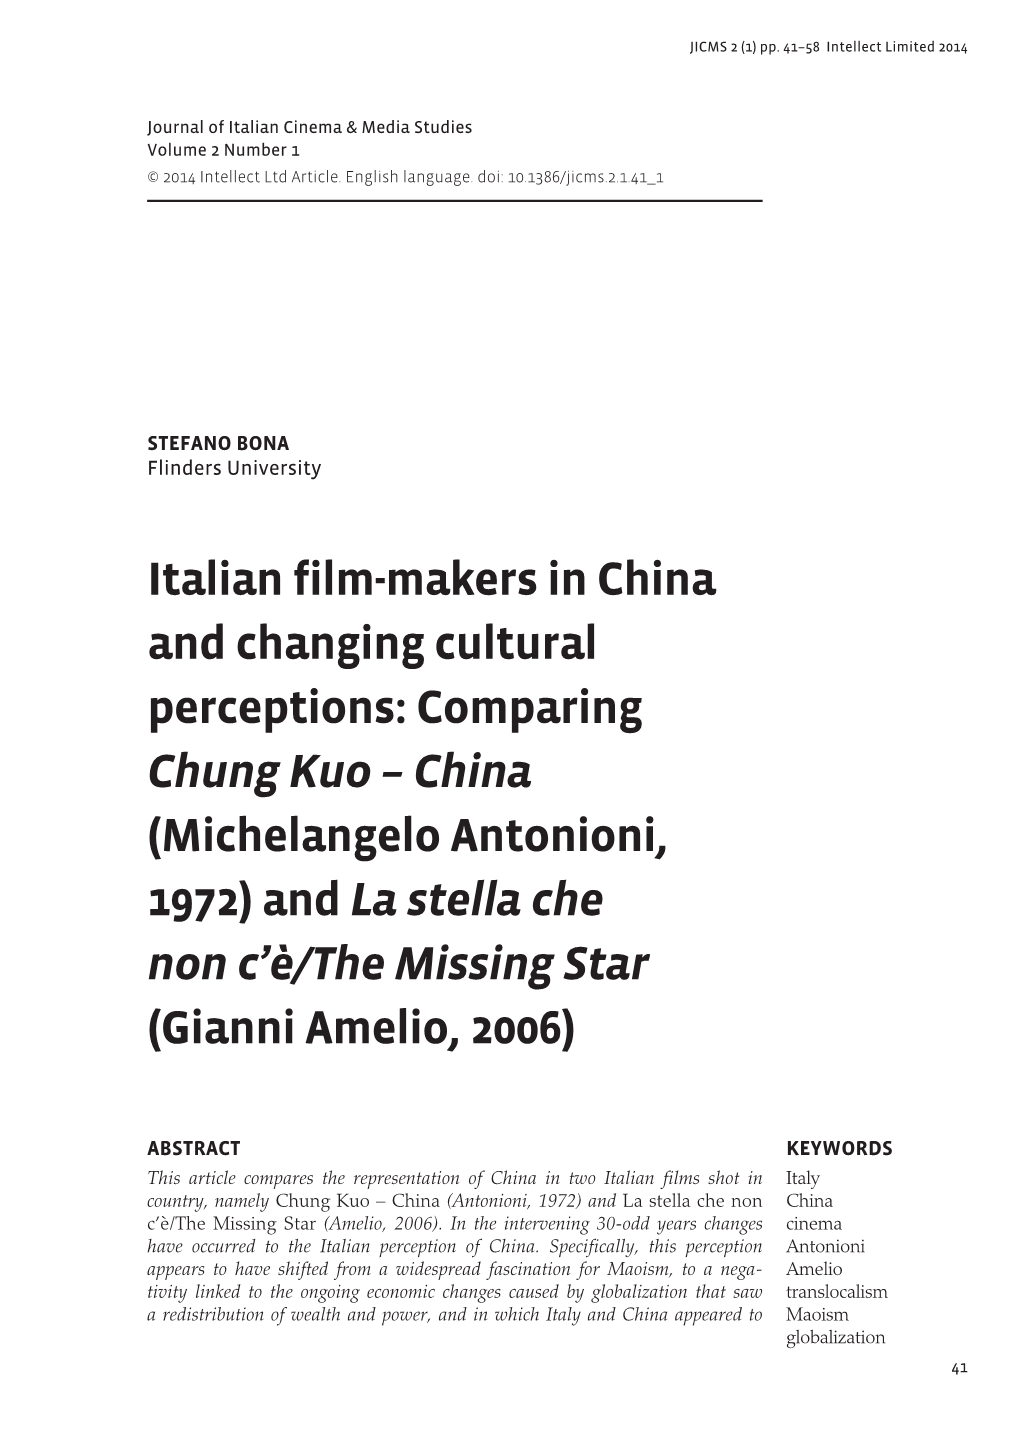 Italian Film-Makers in China and Changing Cultural Perceptions